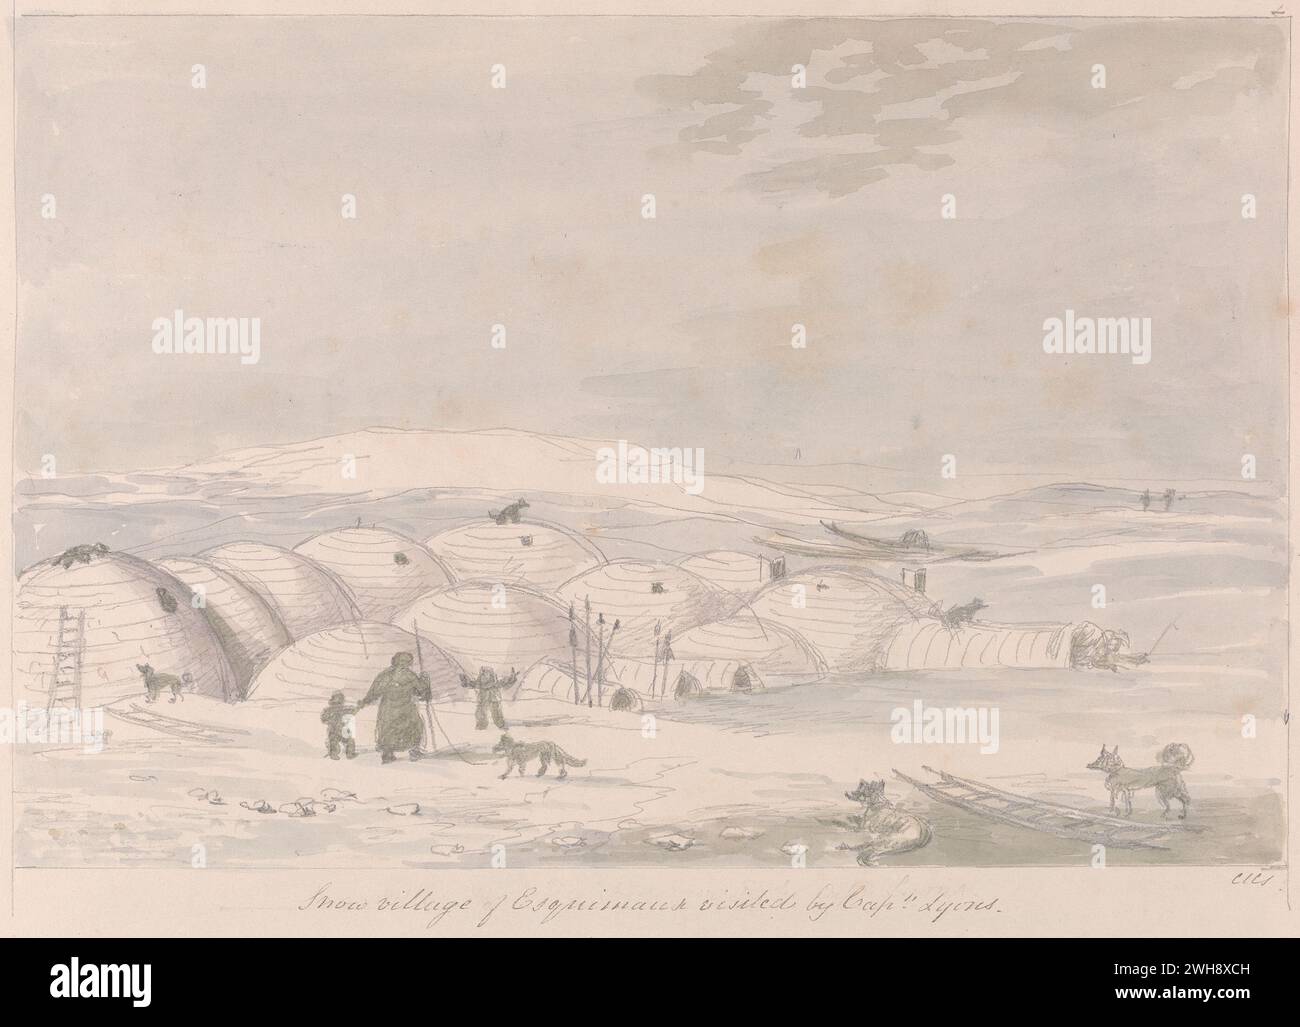 'Snow Village of Inuit visited by Captain Lyons' from the book 'Views of Polar Regions' by Charles Hamilton Smith, Belgian, undated, Watercolor and graphite on moderately thick, moderately textured, cream wove paper, Stock Photo